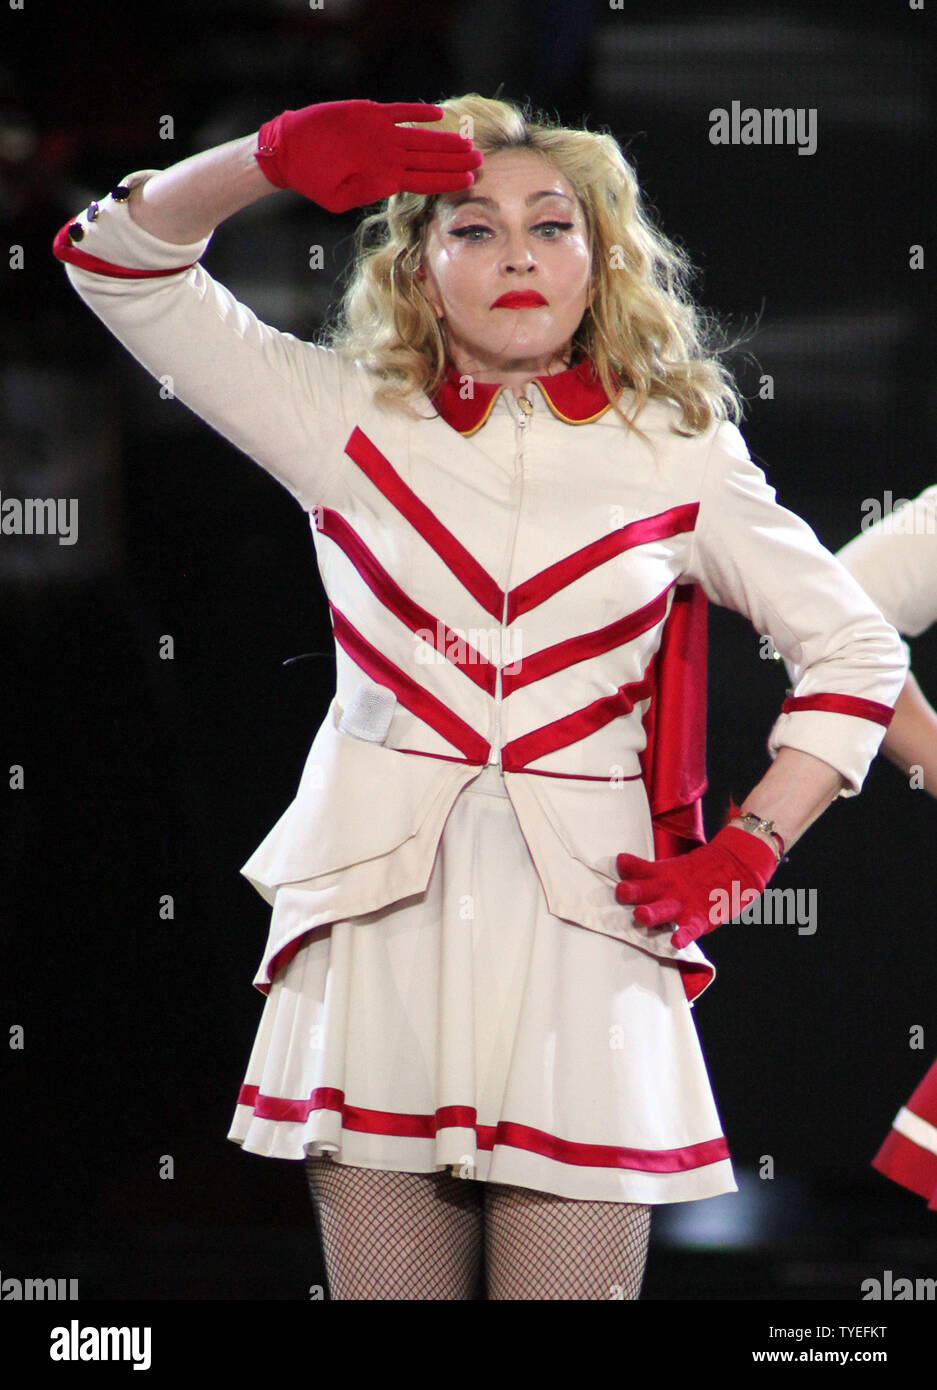 Madonna performs in concert on the last stop of her United States MDNA tour at the American Airlines Arena in Miami on November 19, 2012. UPI/Michael Bush Stock Photo